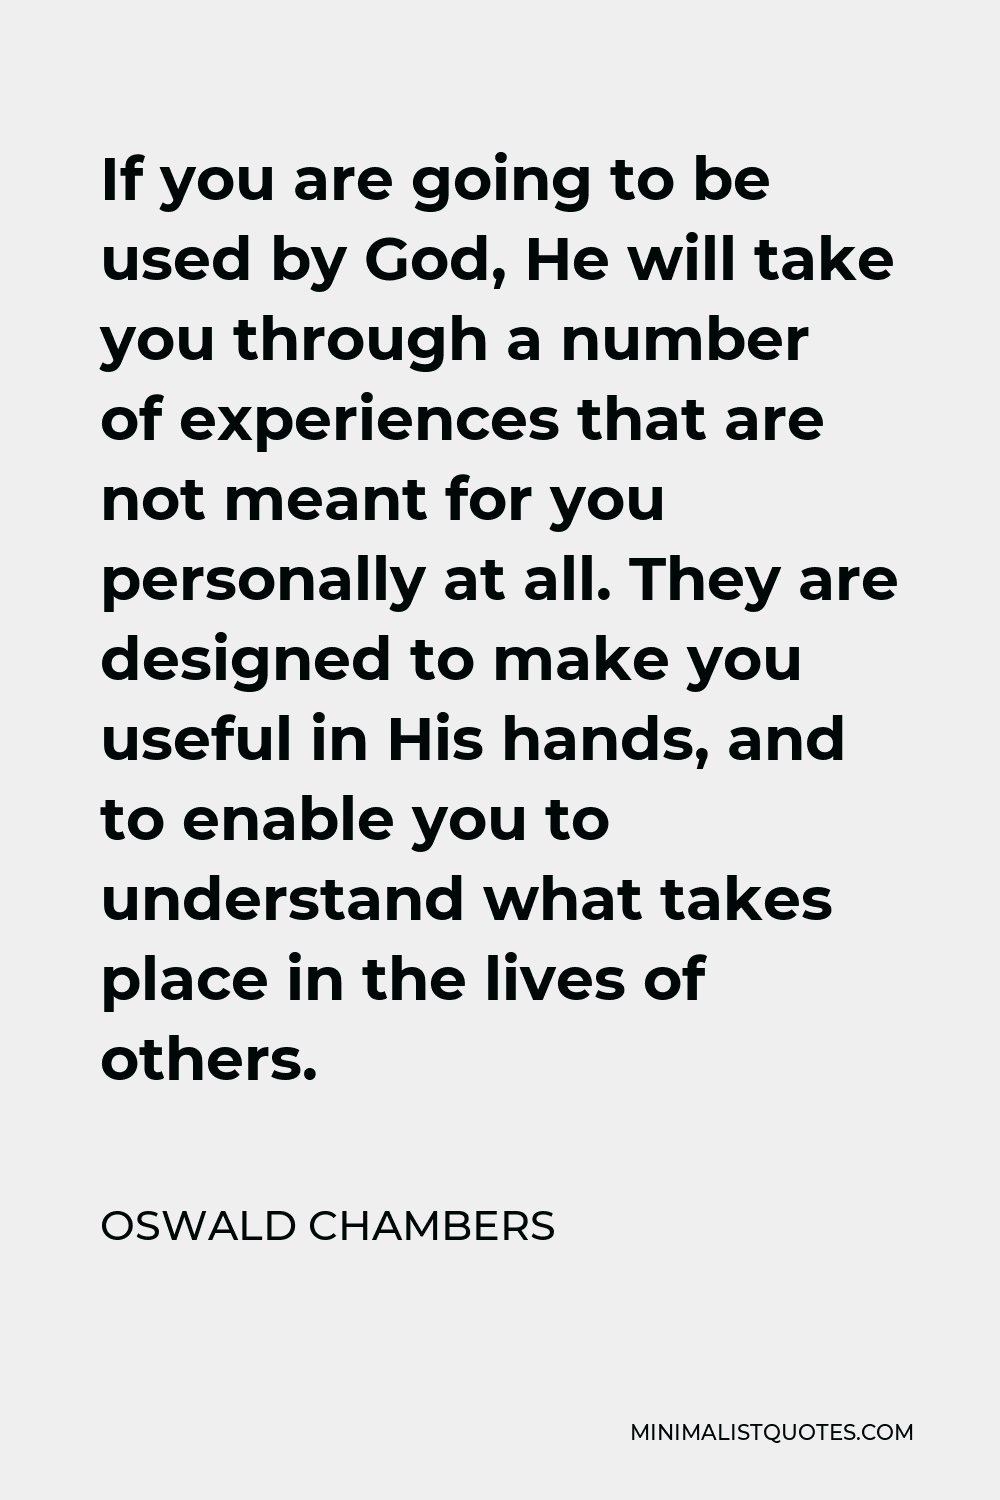 Oswald Chambers Quote - If you are going to be used by God, He will take you through a number of experiences that are not meant for you personally at all. They are designed to make you useful in His hands, and to enable you to understand what takes place in the lives of others.